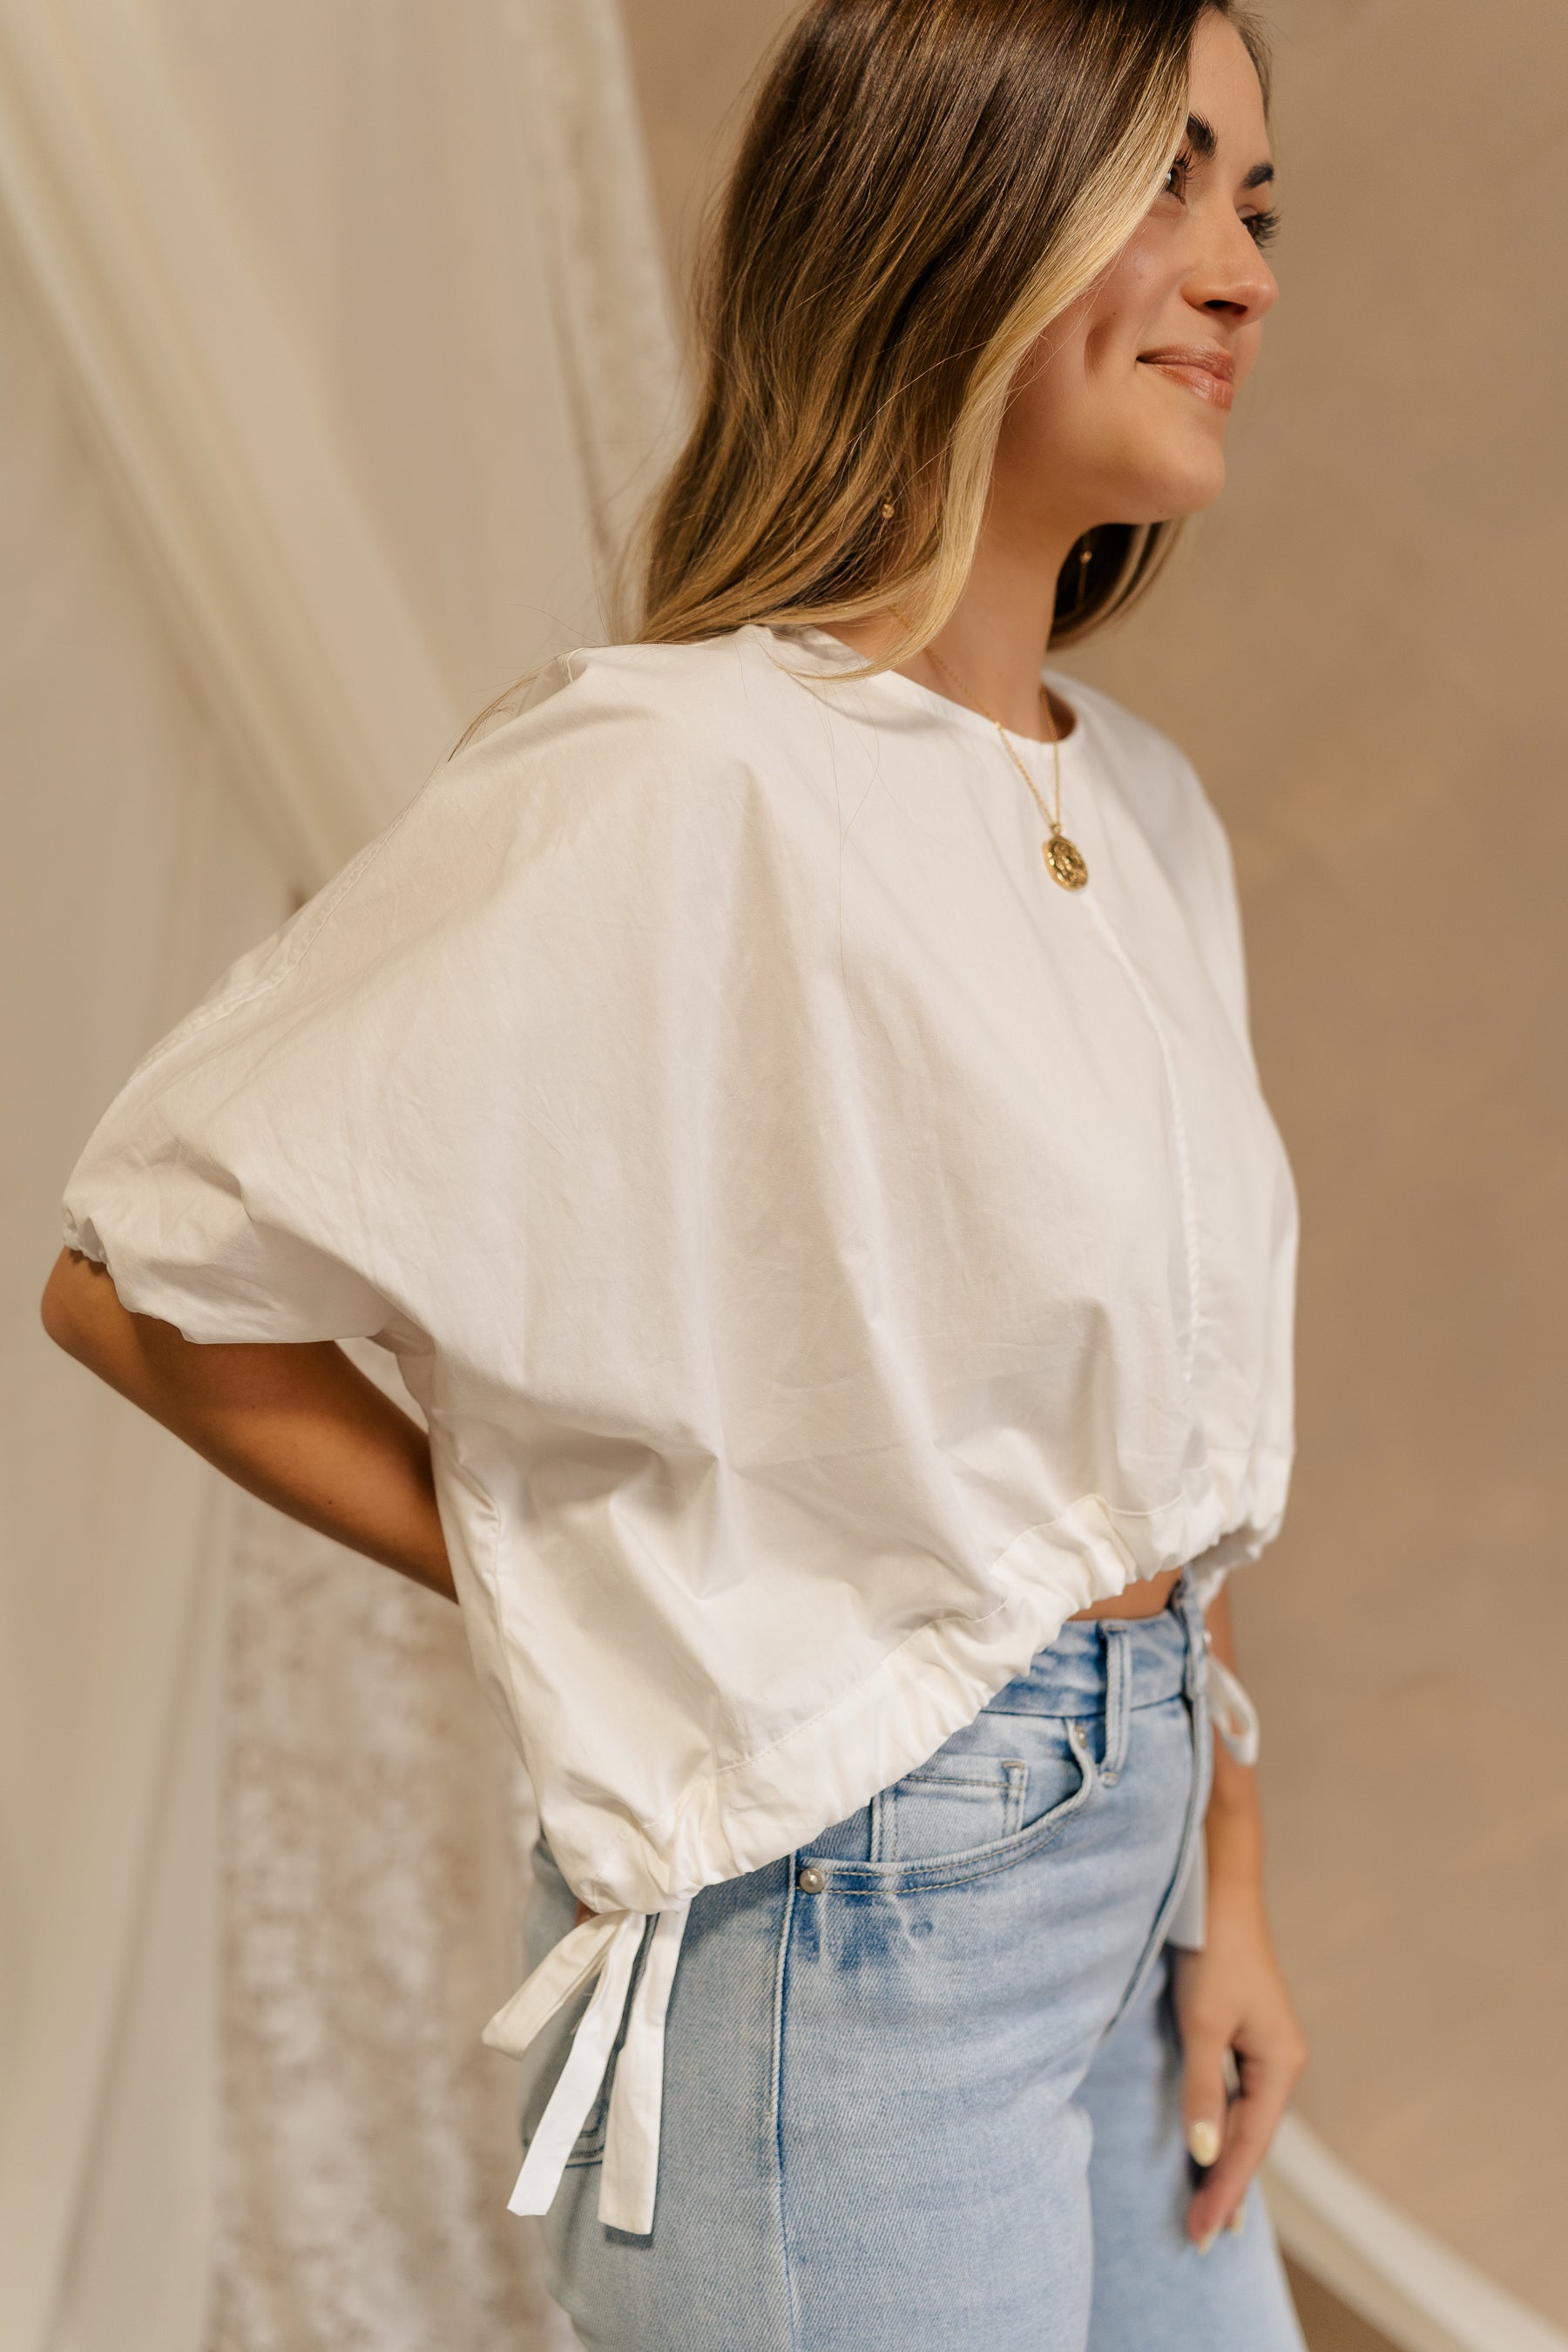 Side view of female model wearing the Karina Drawstring Cropped Short Sleeve Top in white. This top has white fabric, short sleeves with elastic trim, and a cropped drawstring waist with ties.